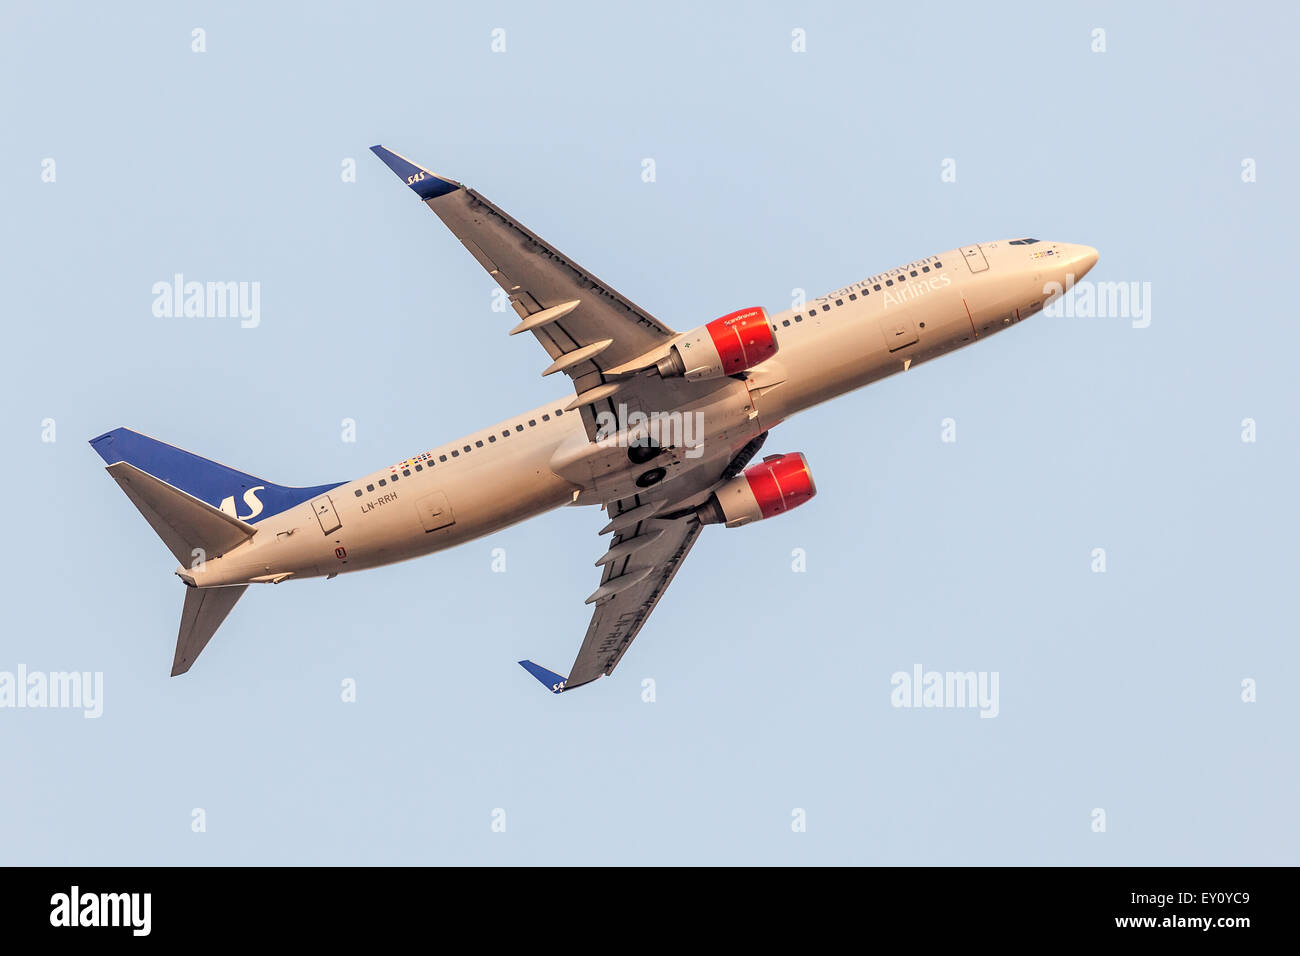 Boeing 737 Next Gen of the Scandinavian Air System after take off at the Frankfurt International Airport Stock Photo